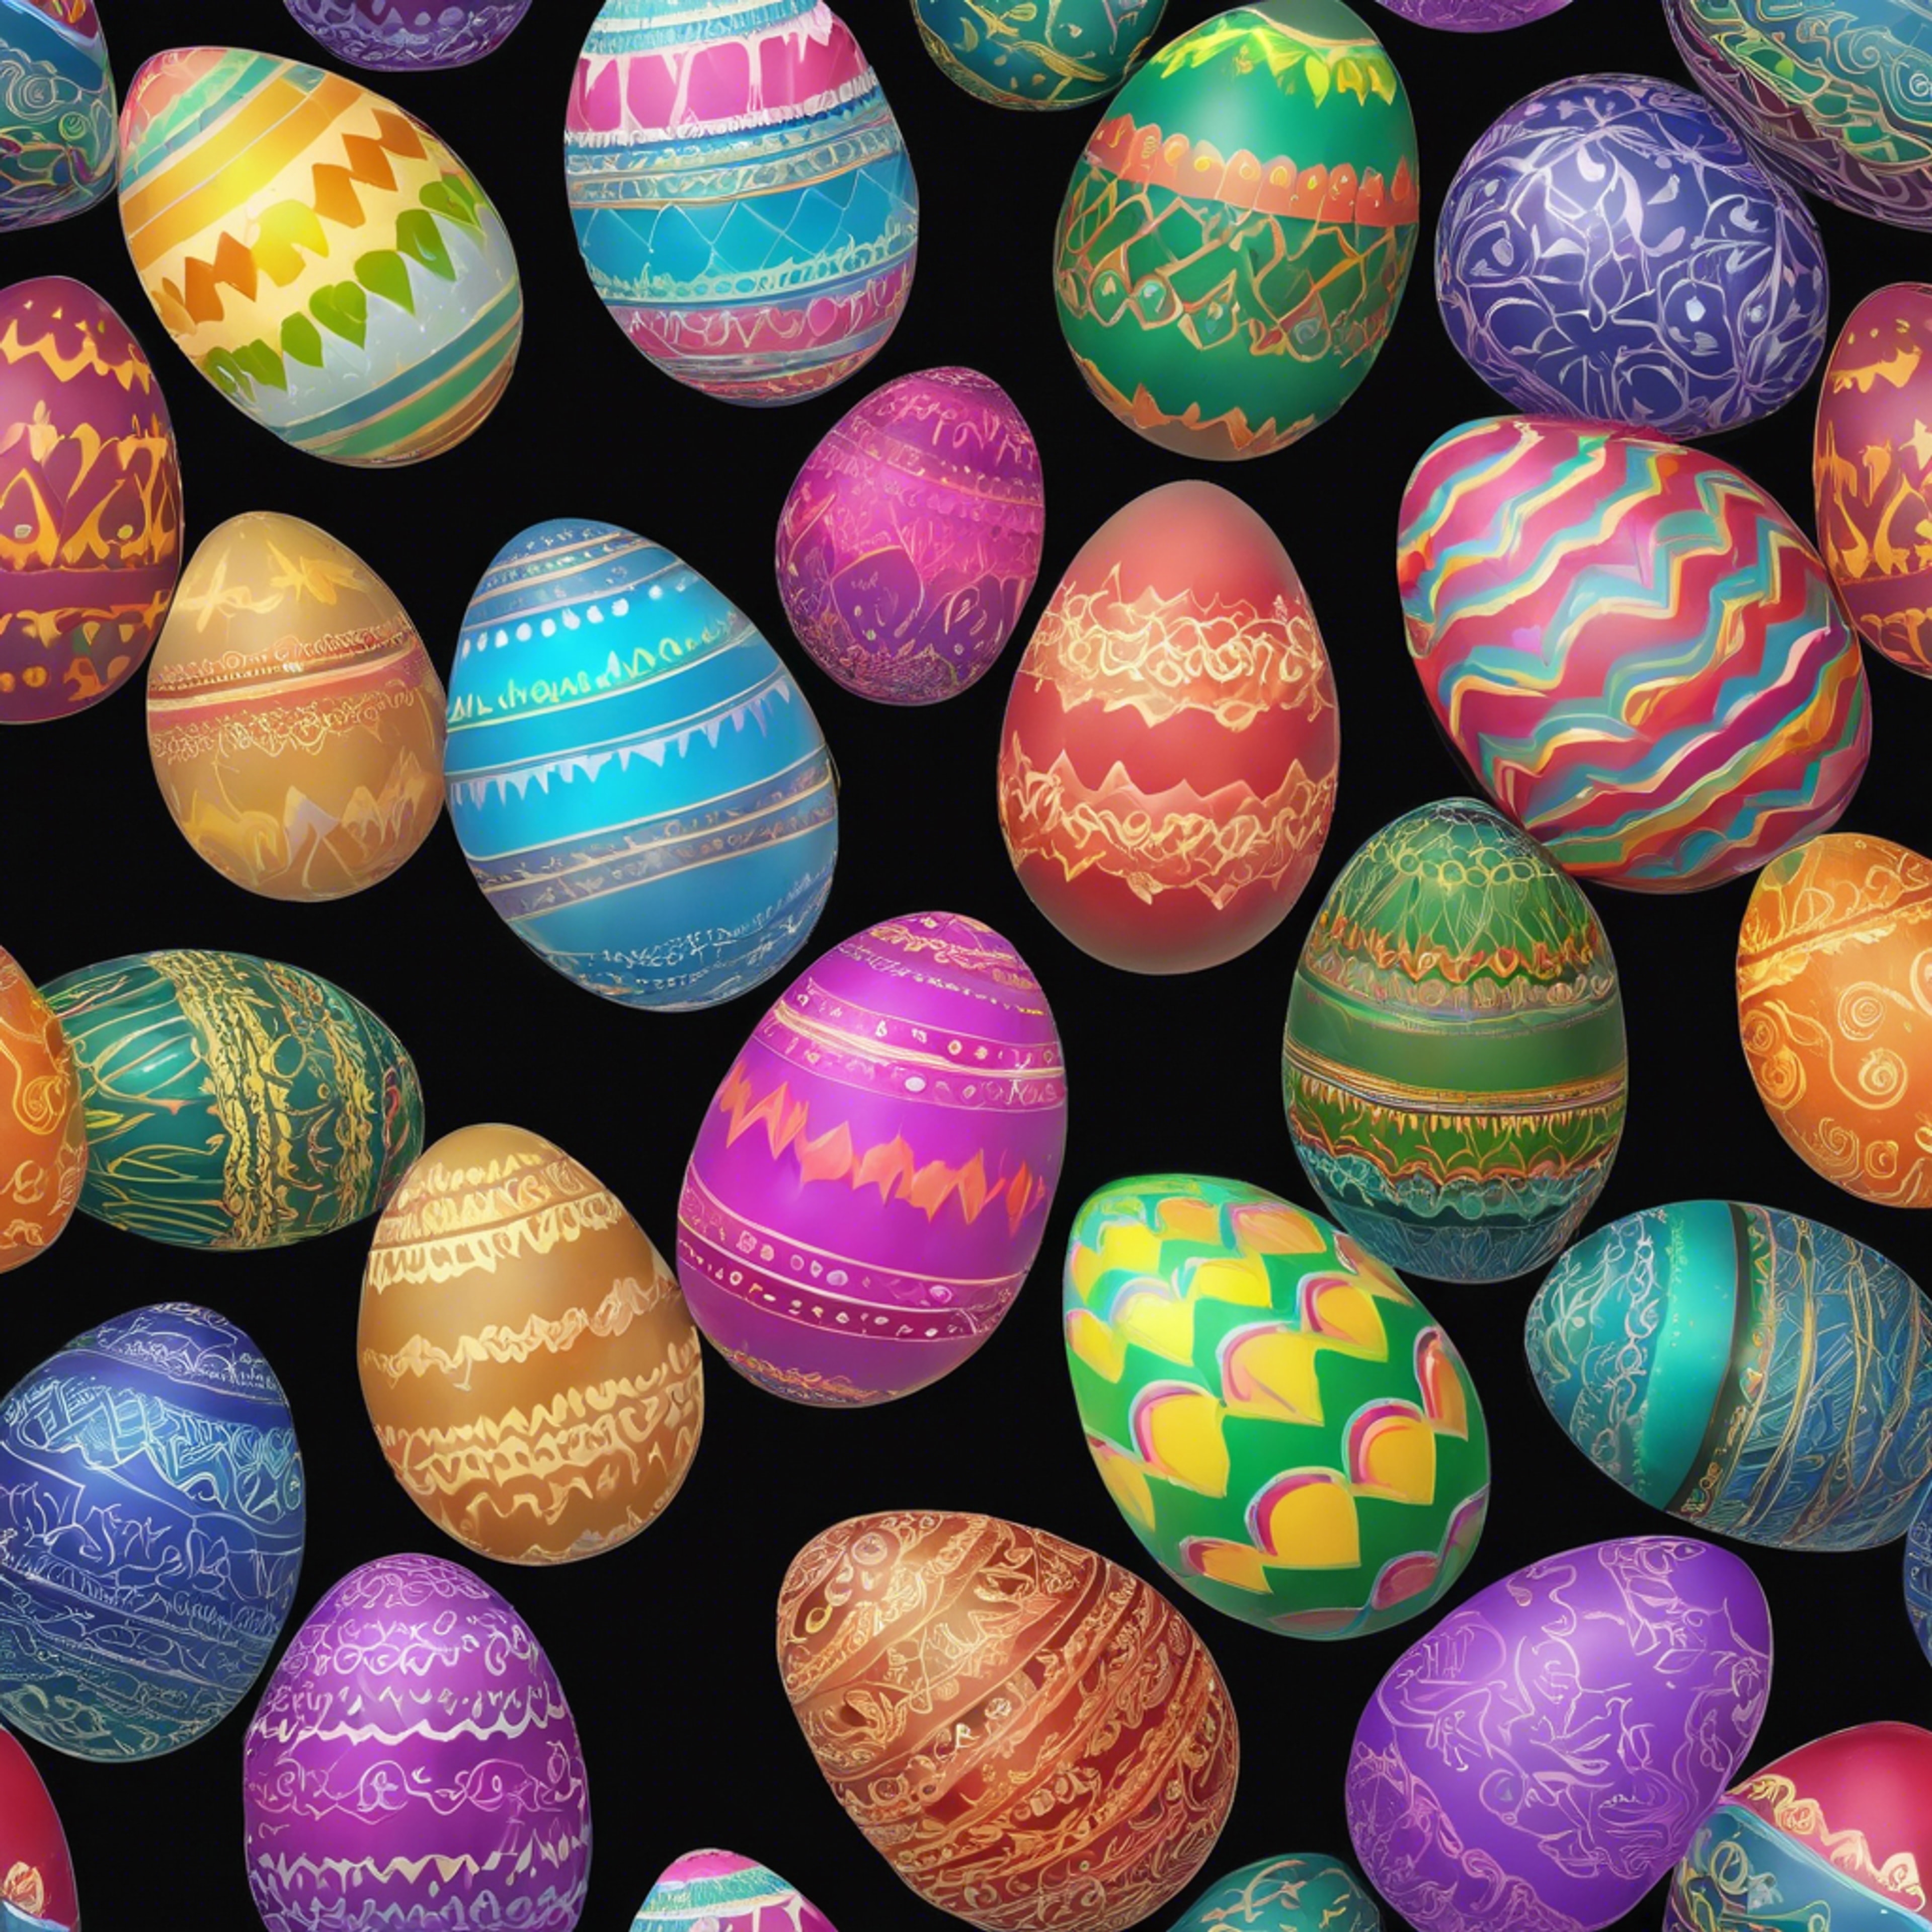 A rainbow-colored Easter egg displayed against a black background for dramatic effect. Тапет[001a212516d6409aac67]